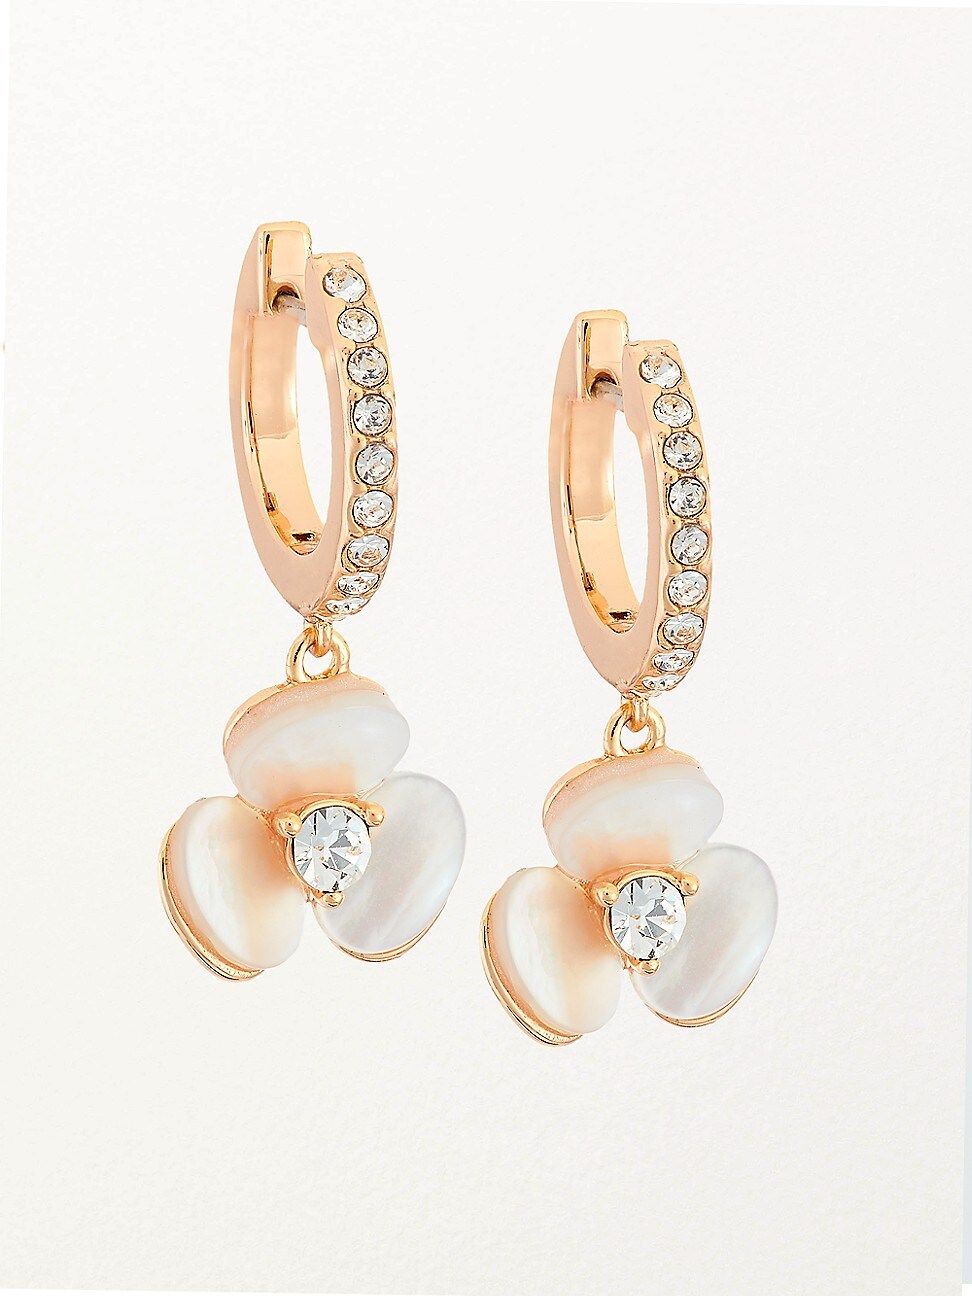 Kate Spade New York Women's Mother-Of-Pearl & 14K Rose Golplated Floral Earrings - Rose Gold | Saks Fifth Avenue